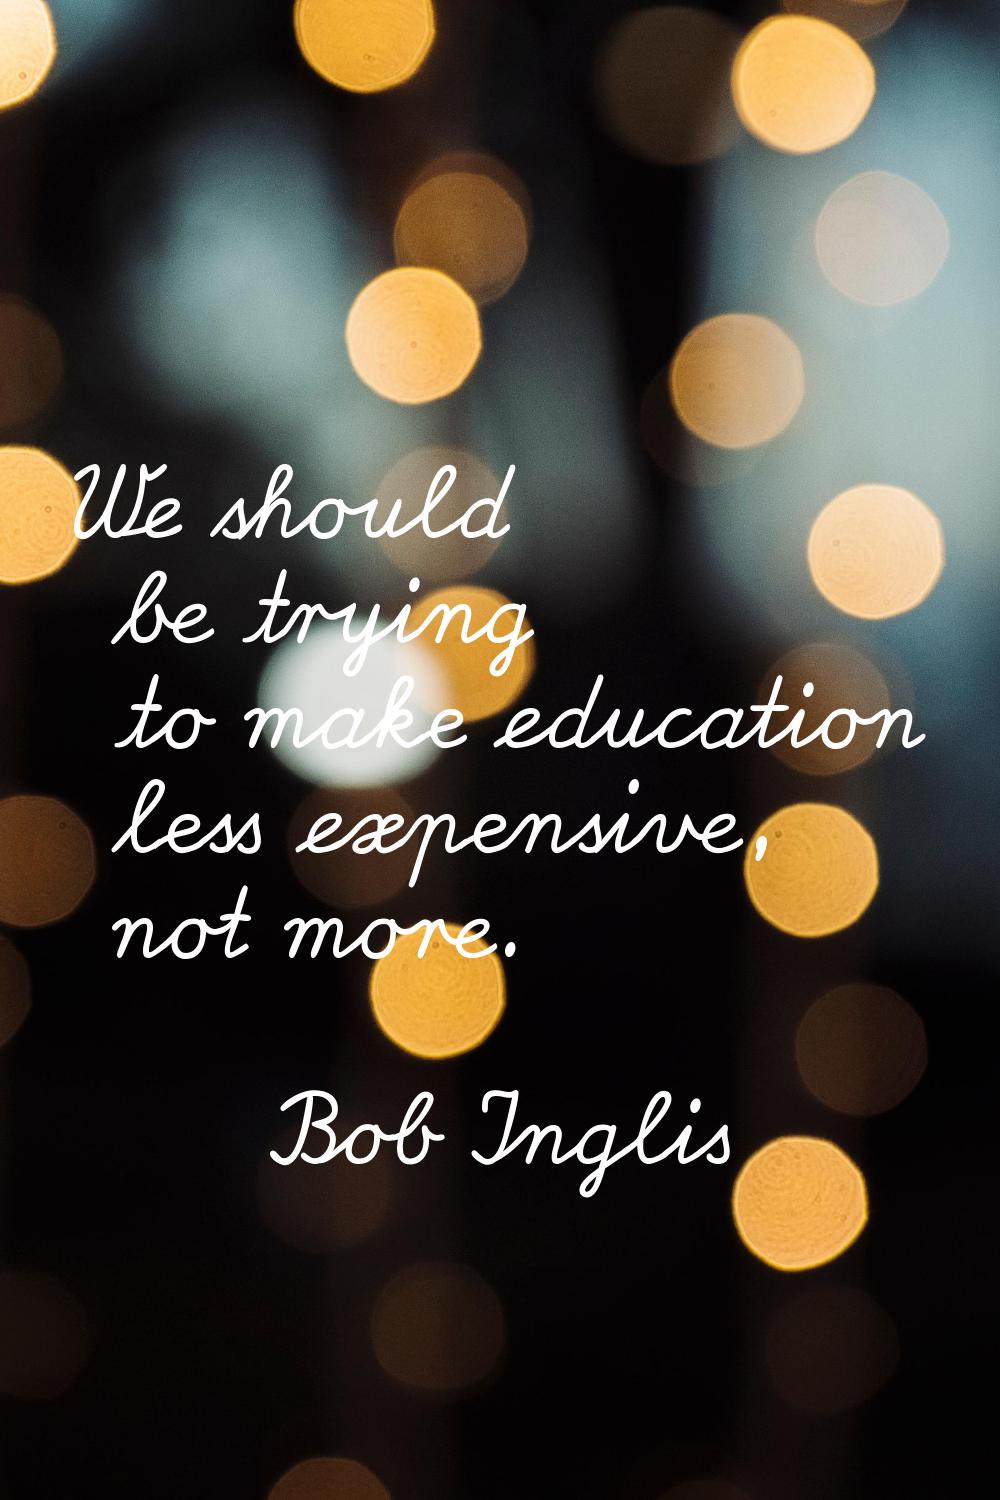 We should be trying to make education less expensive, not more.